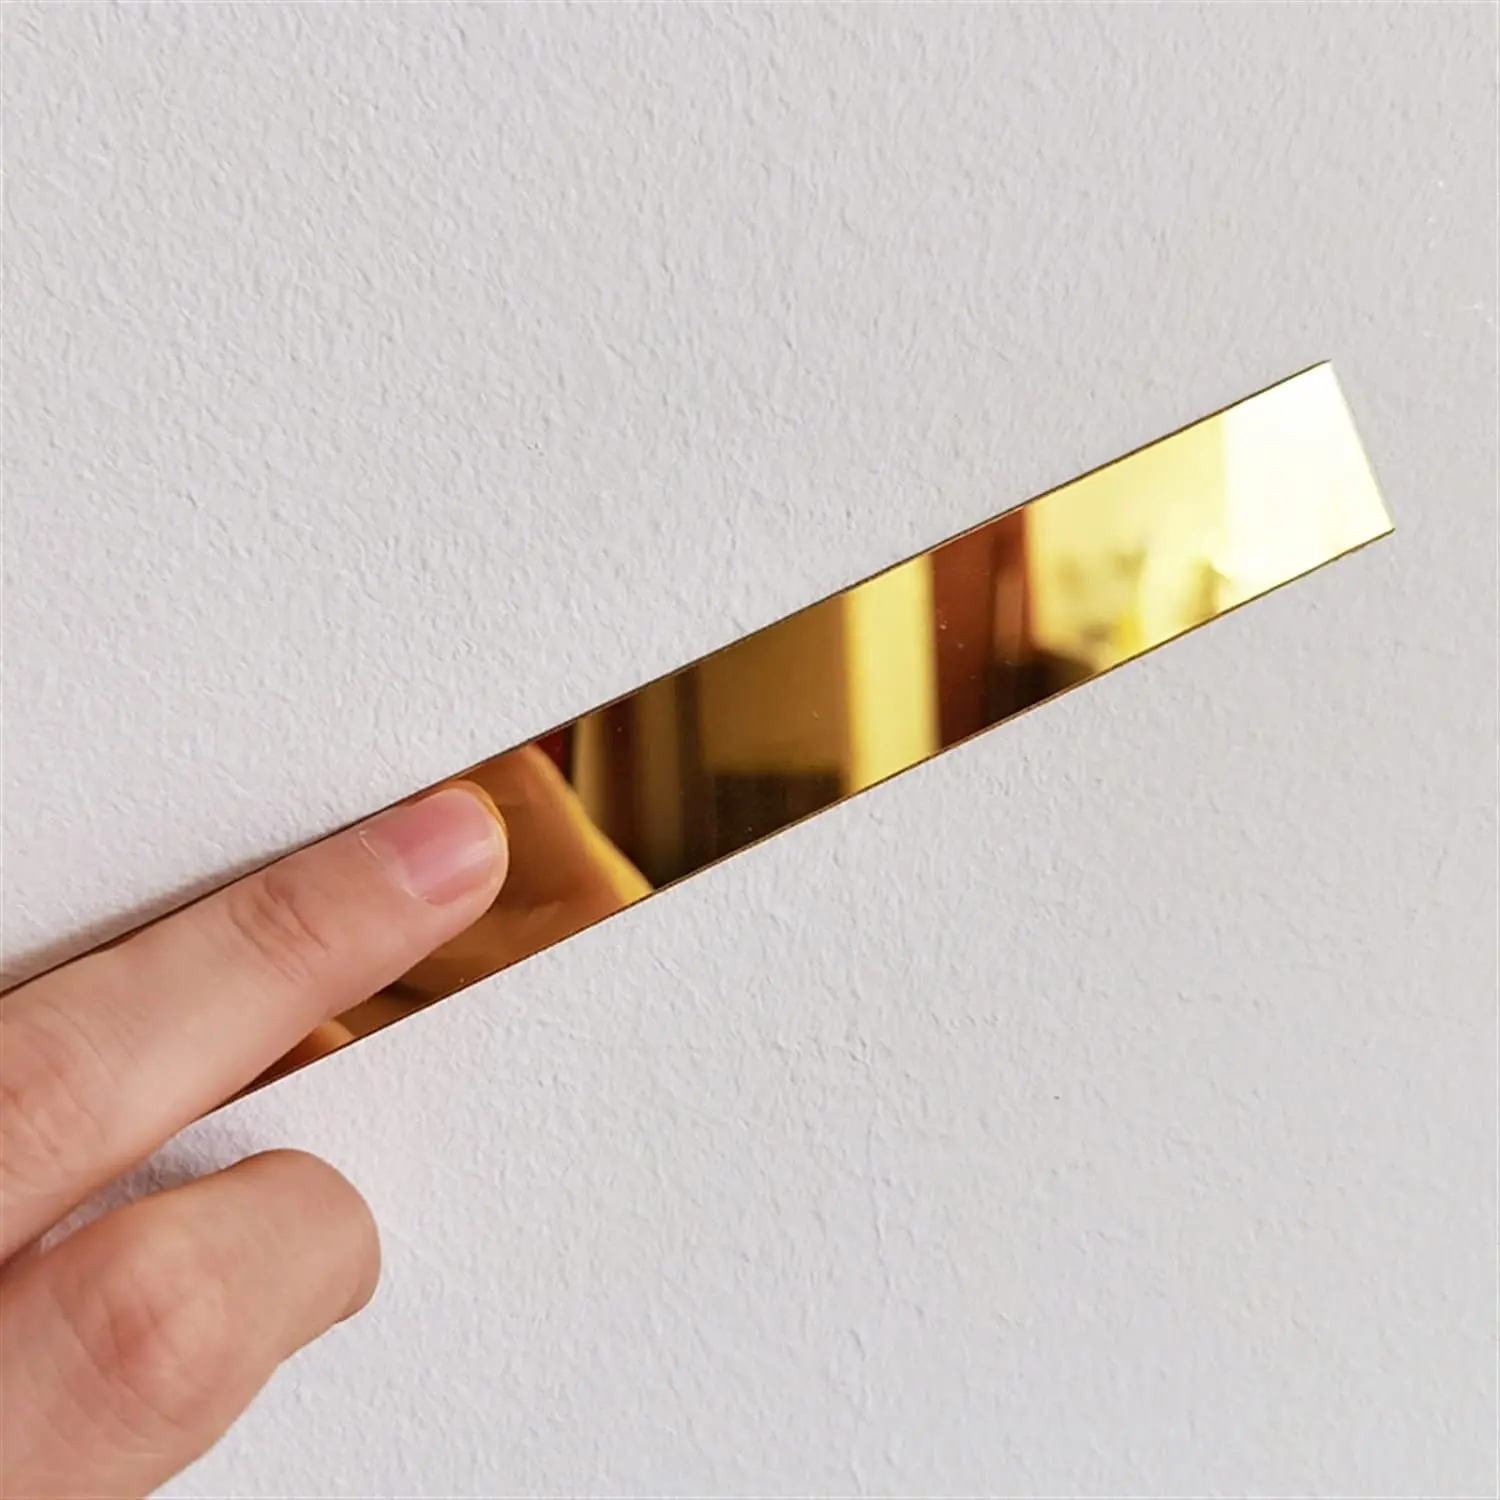 Molding & Wall Trim | Gold Metalized Mirror-Like Finish Peel and Stick for Ceiling background wall furniture mirror frame